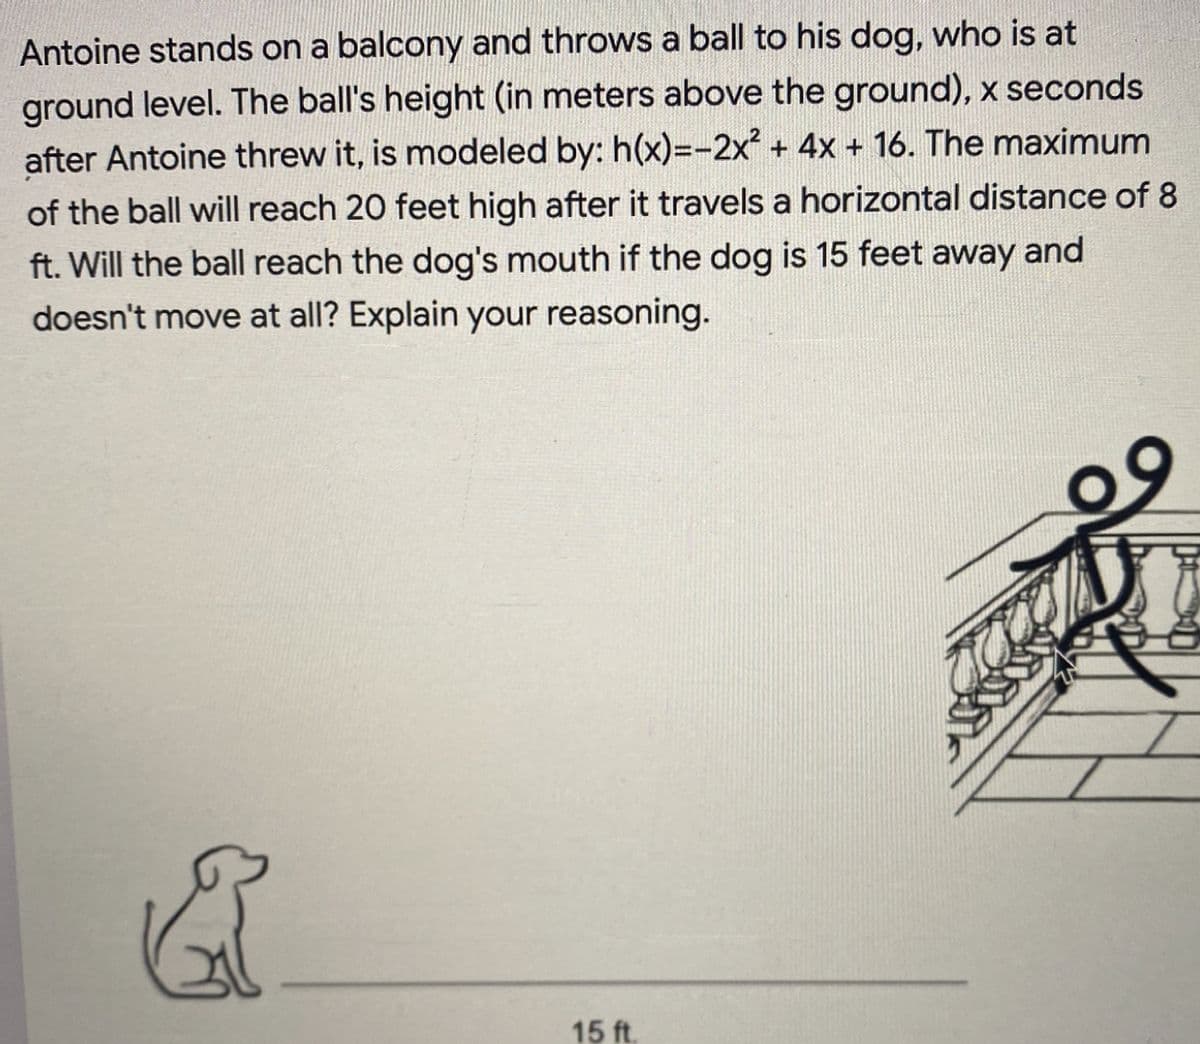 Antoine stands on a balcony and throws a ball to his dog, who is at
ground level. The ball's height (in meters above the ground), x seconds
after Antoine threw it, is modeled by: h(x)=-2x² + 4x + 16. The maximum
of the ball will reach 20 feet high after it travels a horizontal distance of 8
ft. Will the ball reach the dog's mouth if the dog is 15 feet away and
doesn't move at all? Explain your reasoning.
8
15 ft.